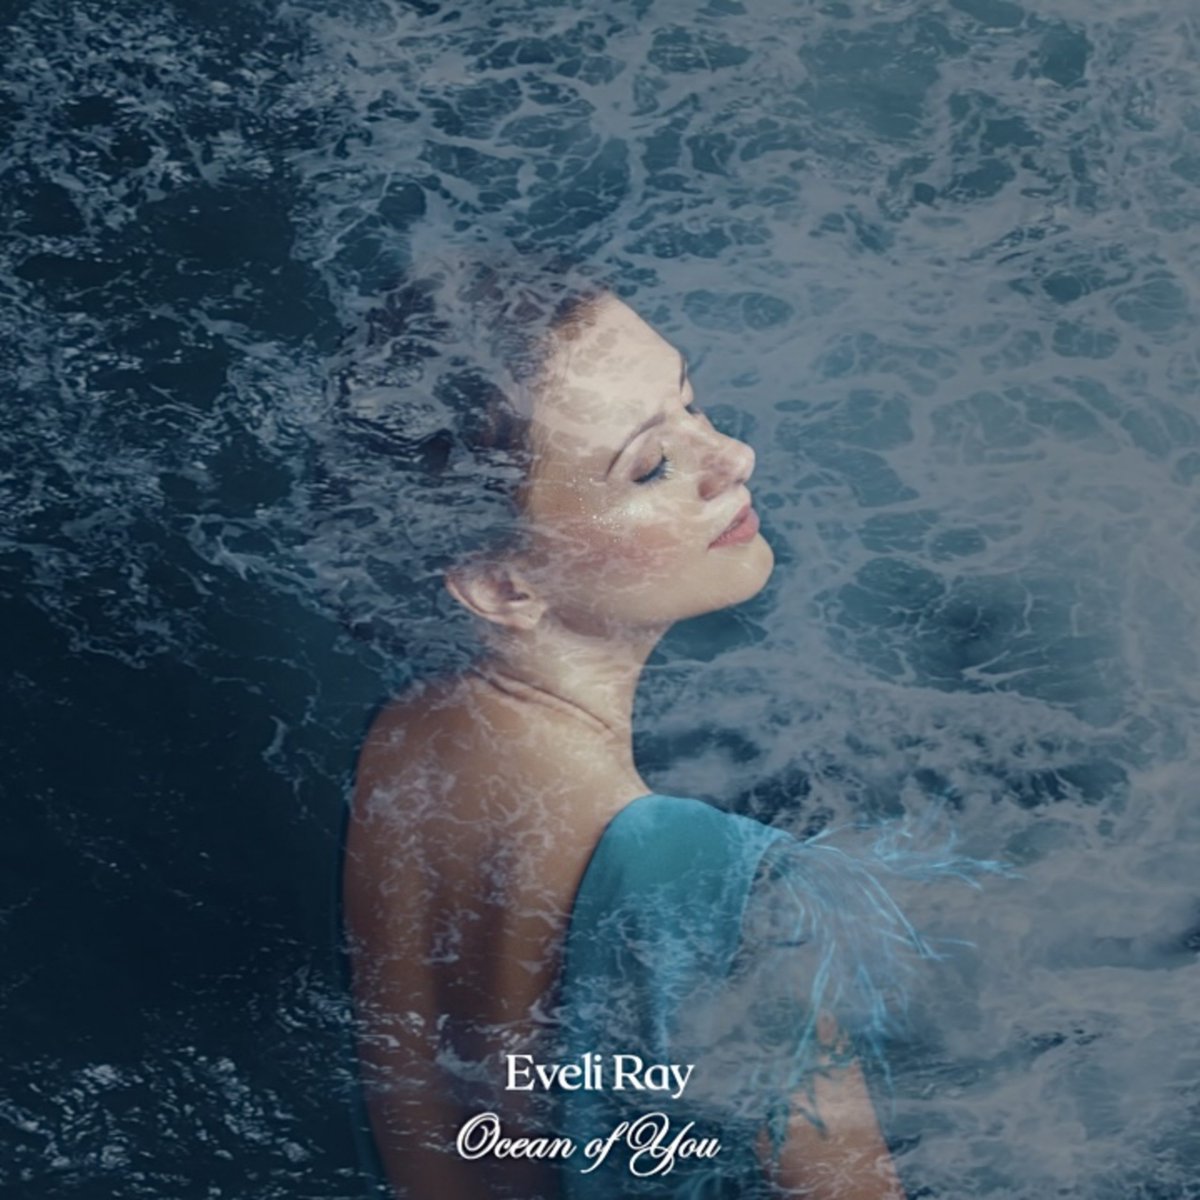 Listen to the single 'Ocean of You' from Evelí Ray and dive into yourself like an ocean. #indiedockmusicblog #folkpop eu1.hubs.ly/H098ZQ20